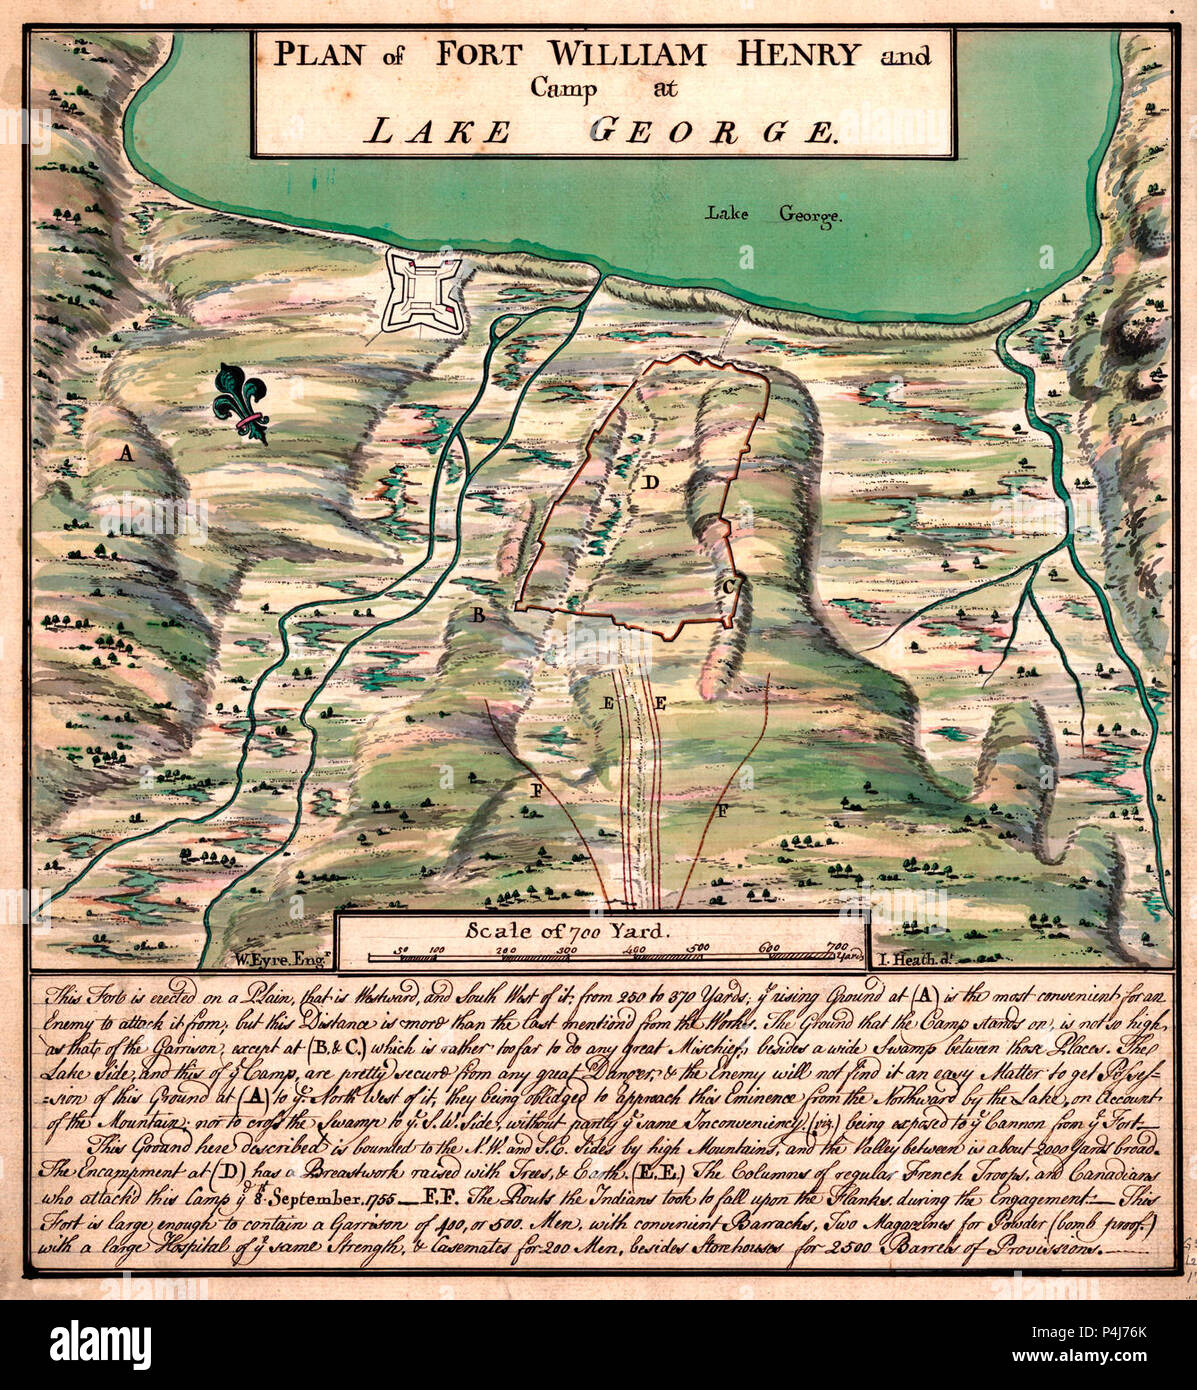 Plan of Fort William Henry and Camp at Lake George, circa 1760 Stock Photo